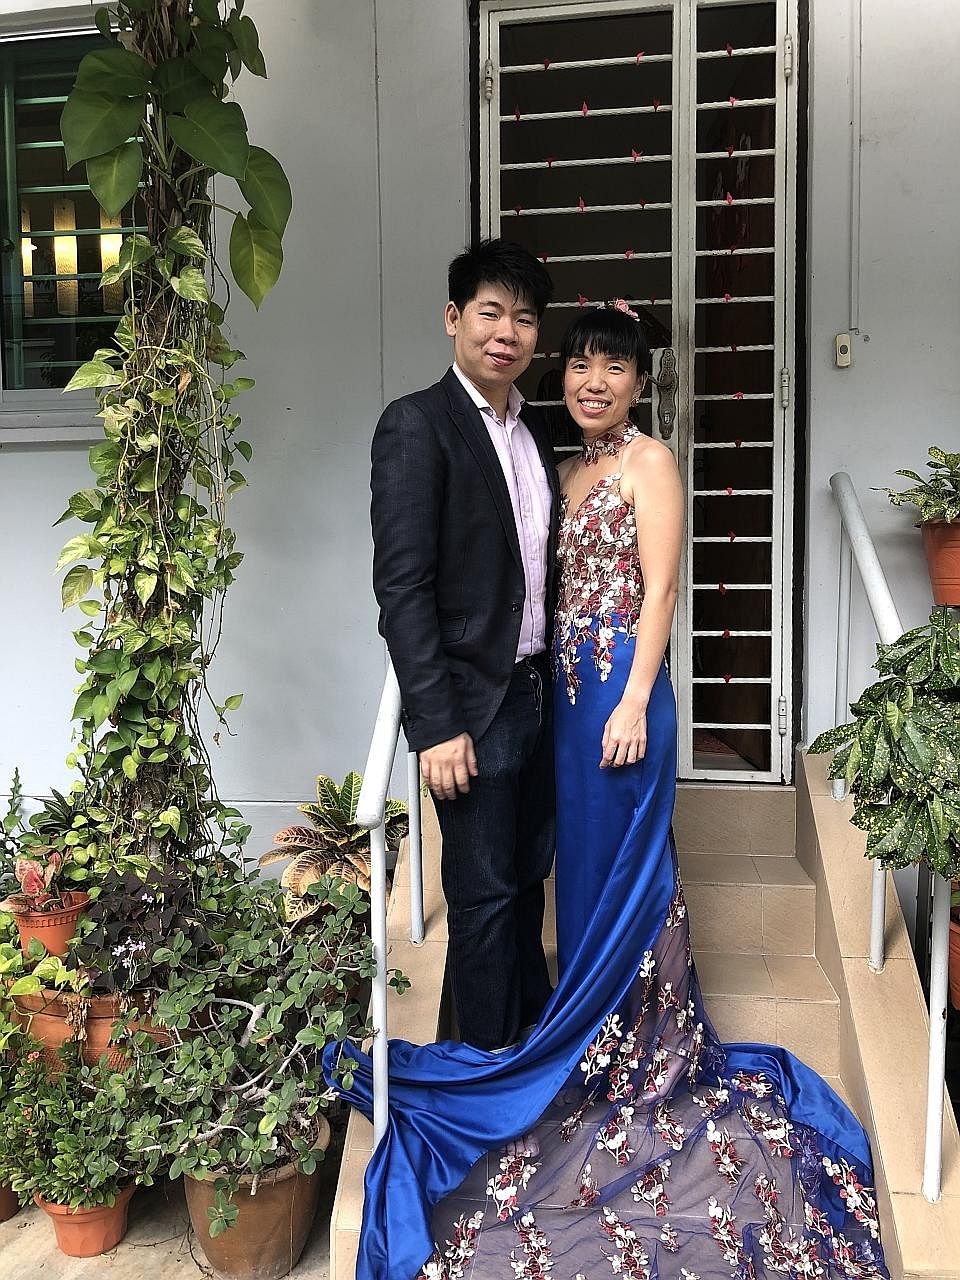 Chef Chung Deming and sports massage therapist Choy Zhen Fang had planned a 25-table wedding dinner, but decided to hold a virtual solemnisation on May 25 at the Housing Board maisonette where they live with his family. 